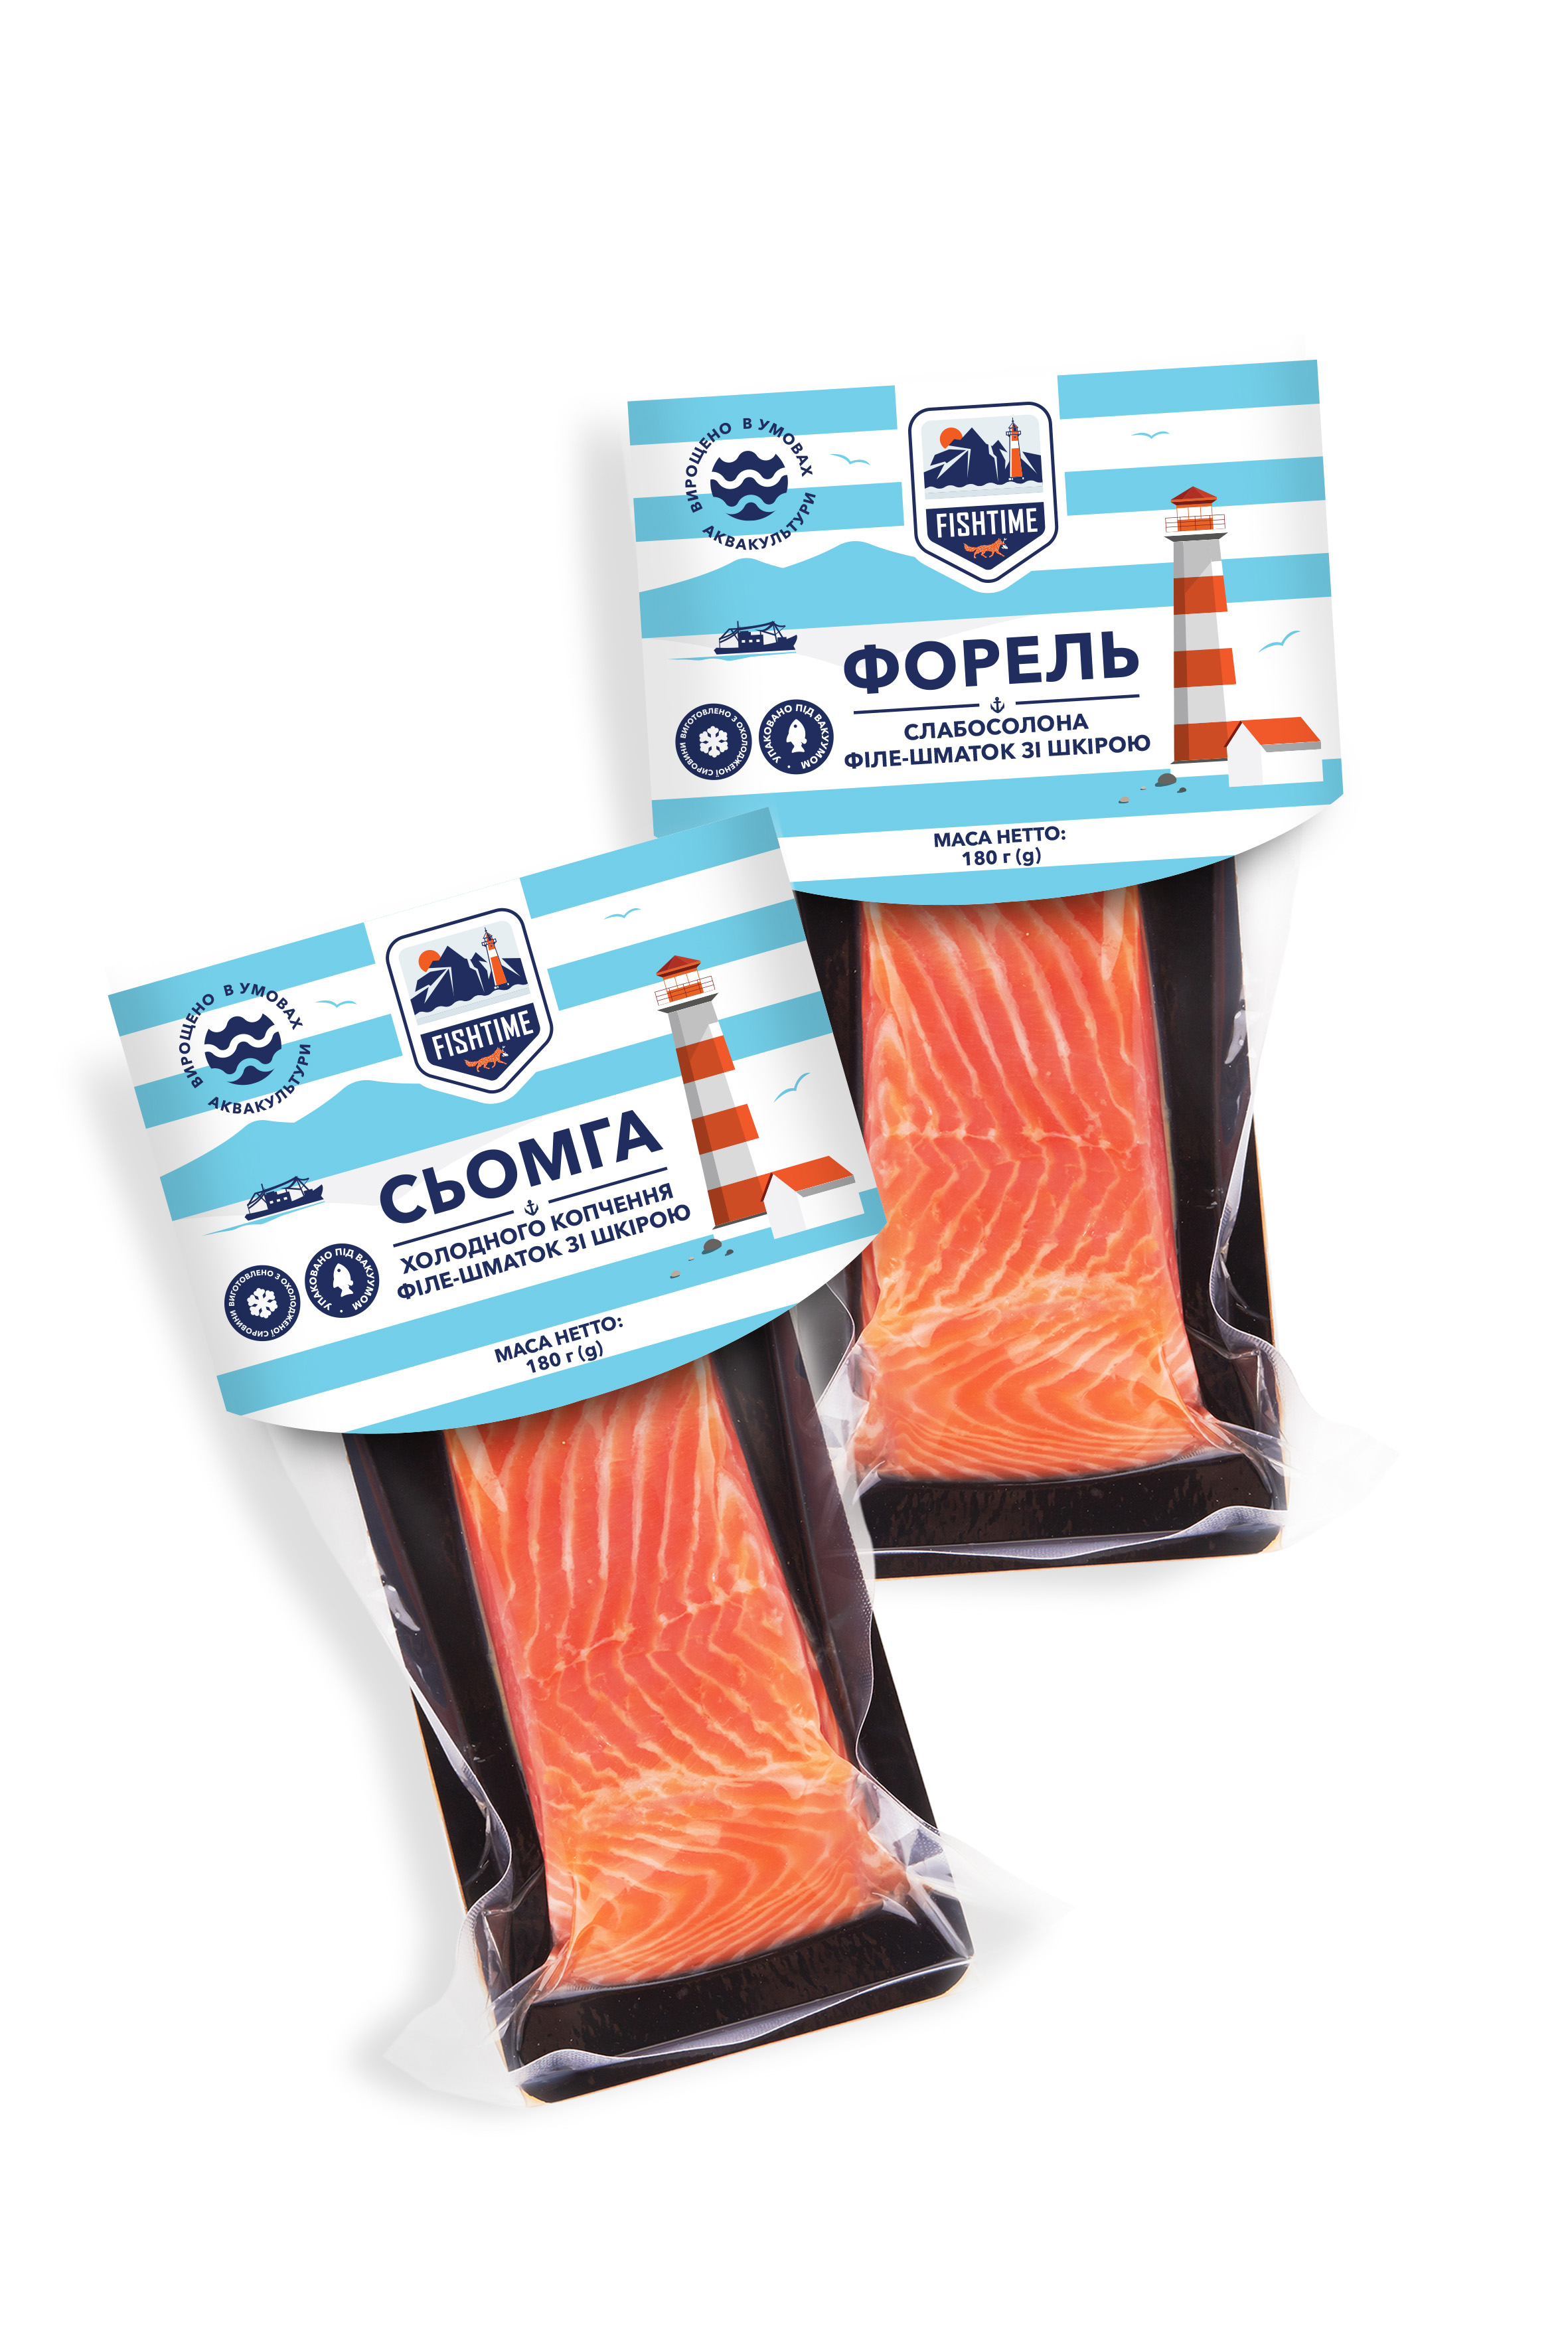 Fishtime New Series of Seafood Products Designed by Olga Takhtarova ...